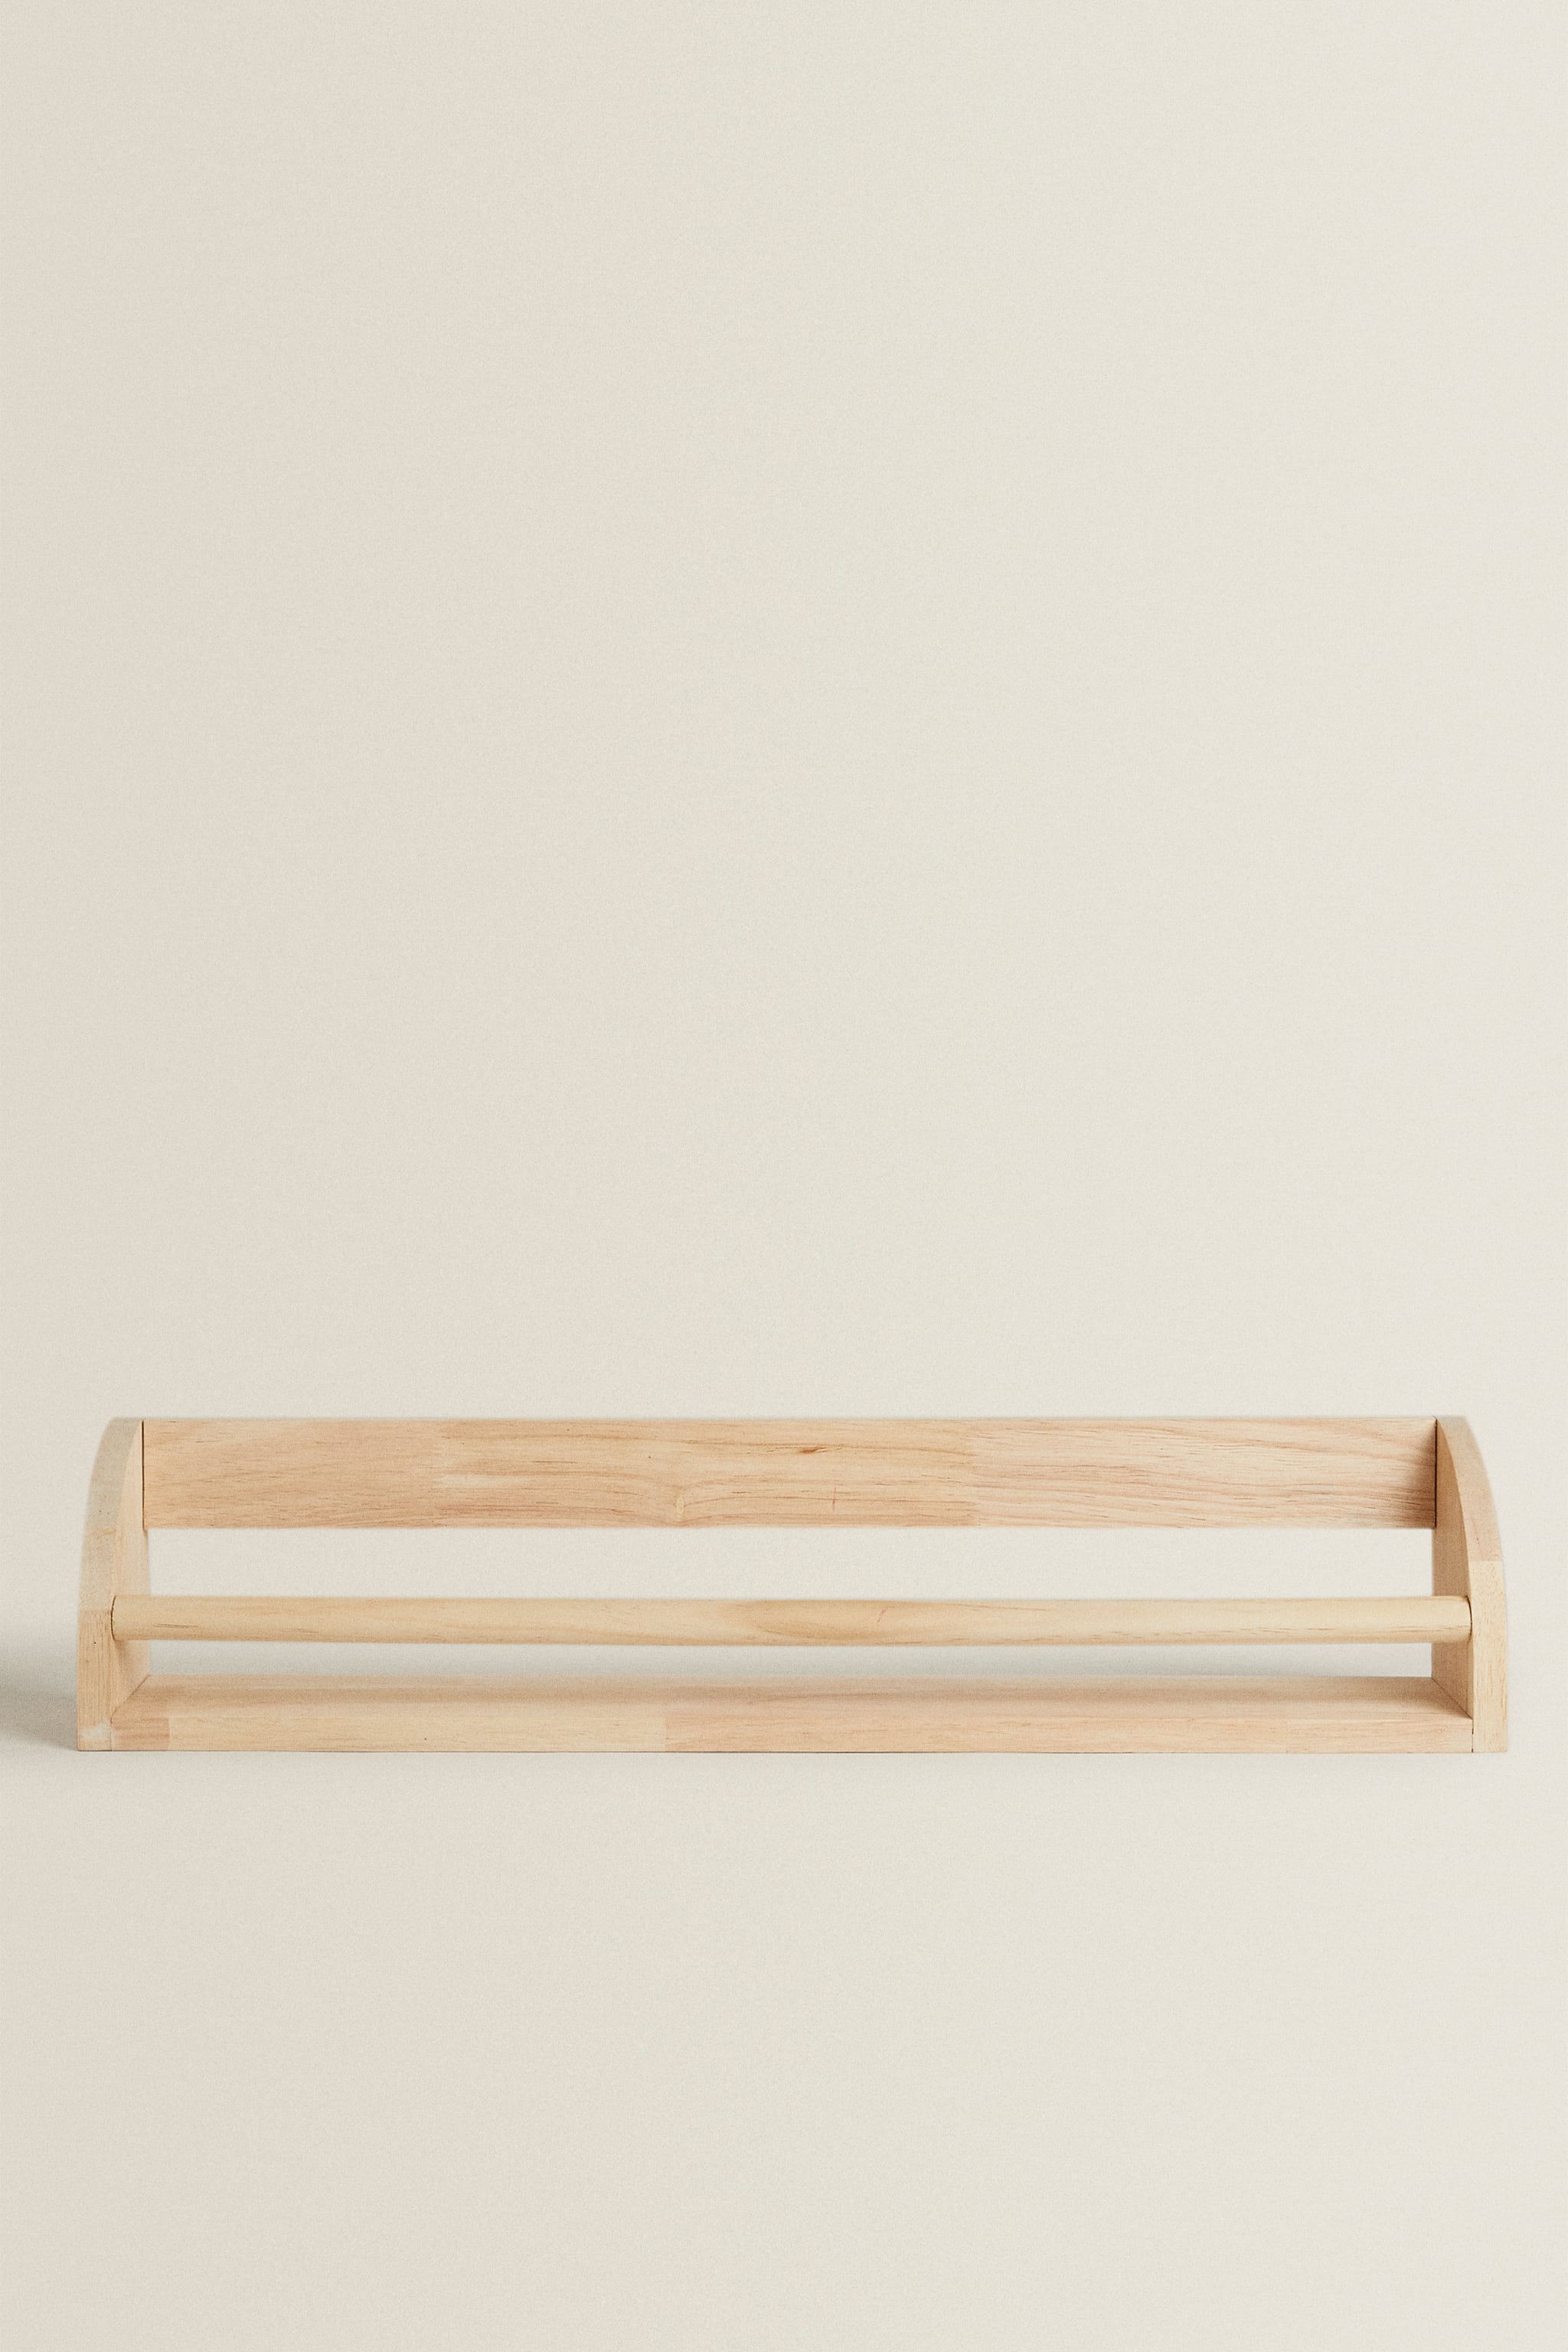 WOODEN SHELF WITH FRONT BAR